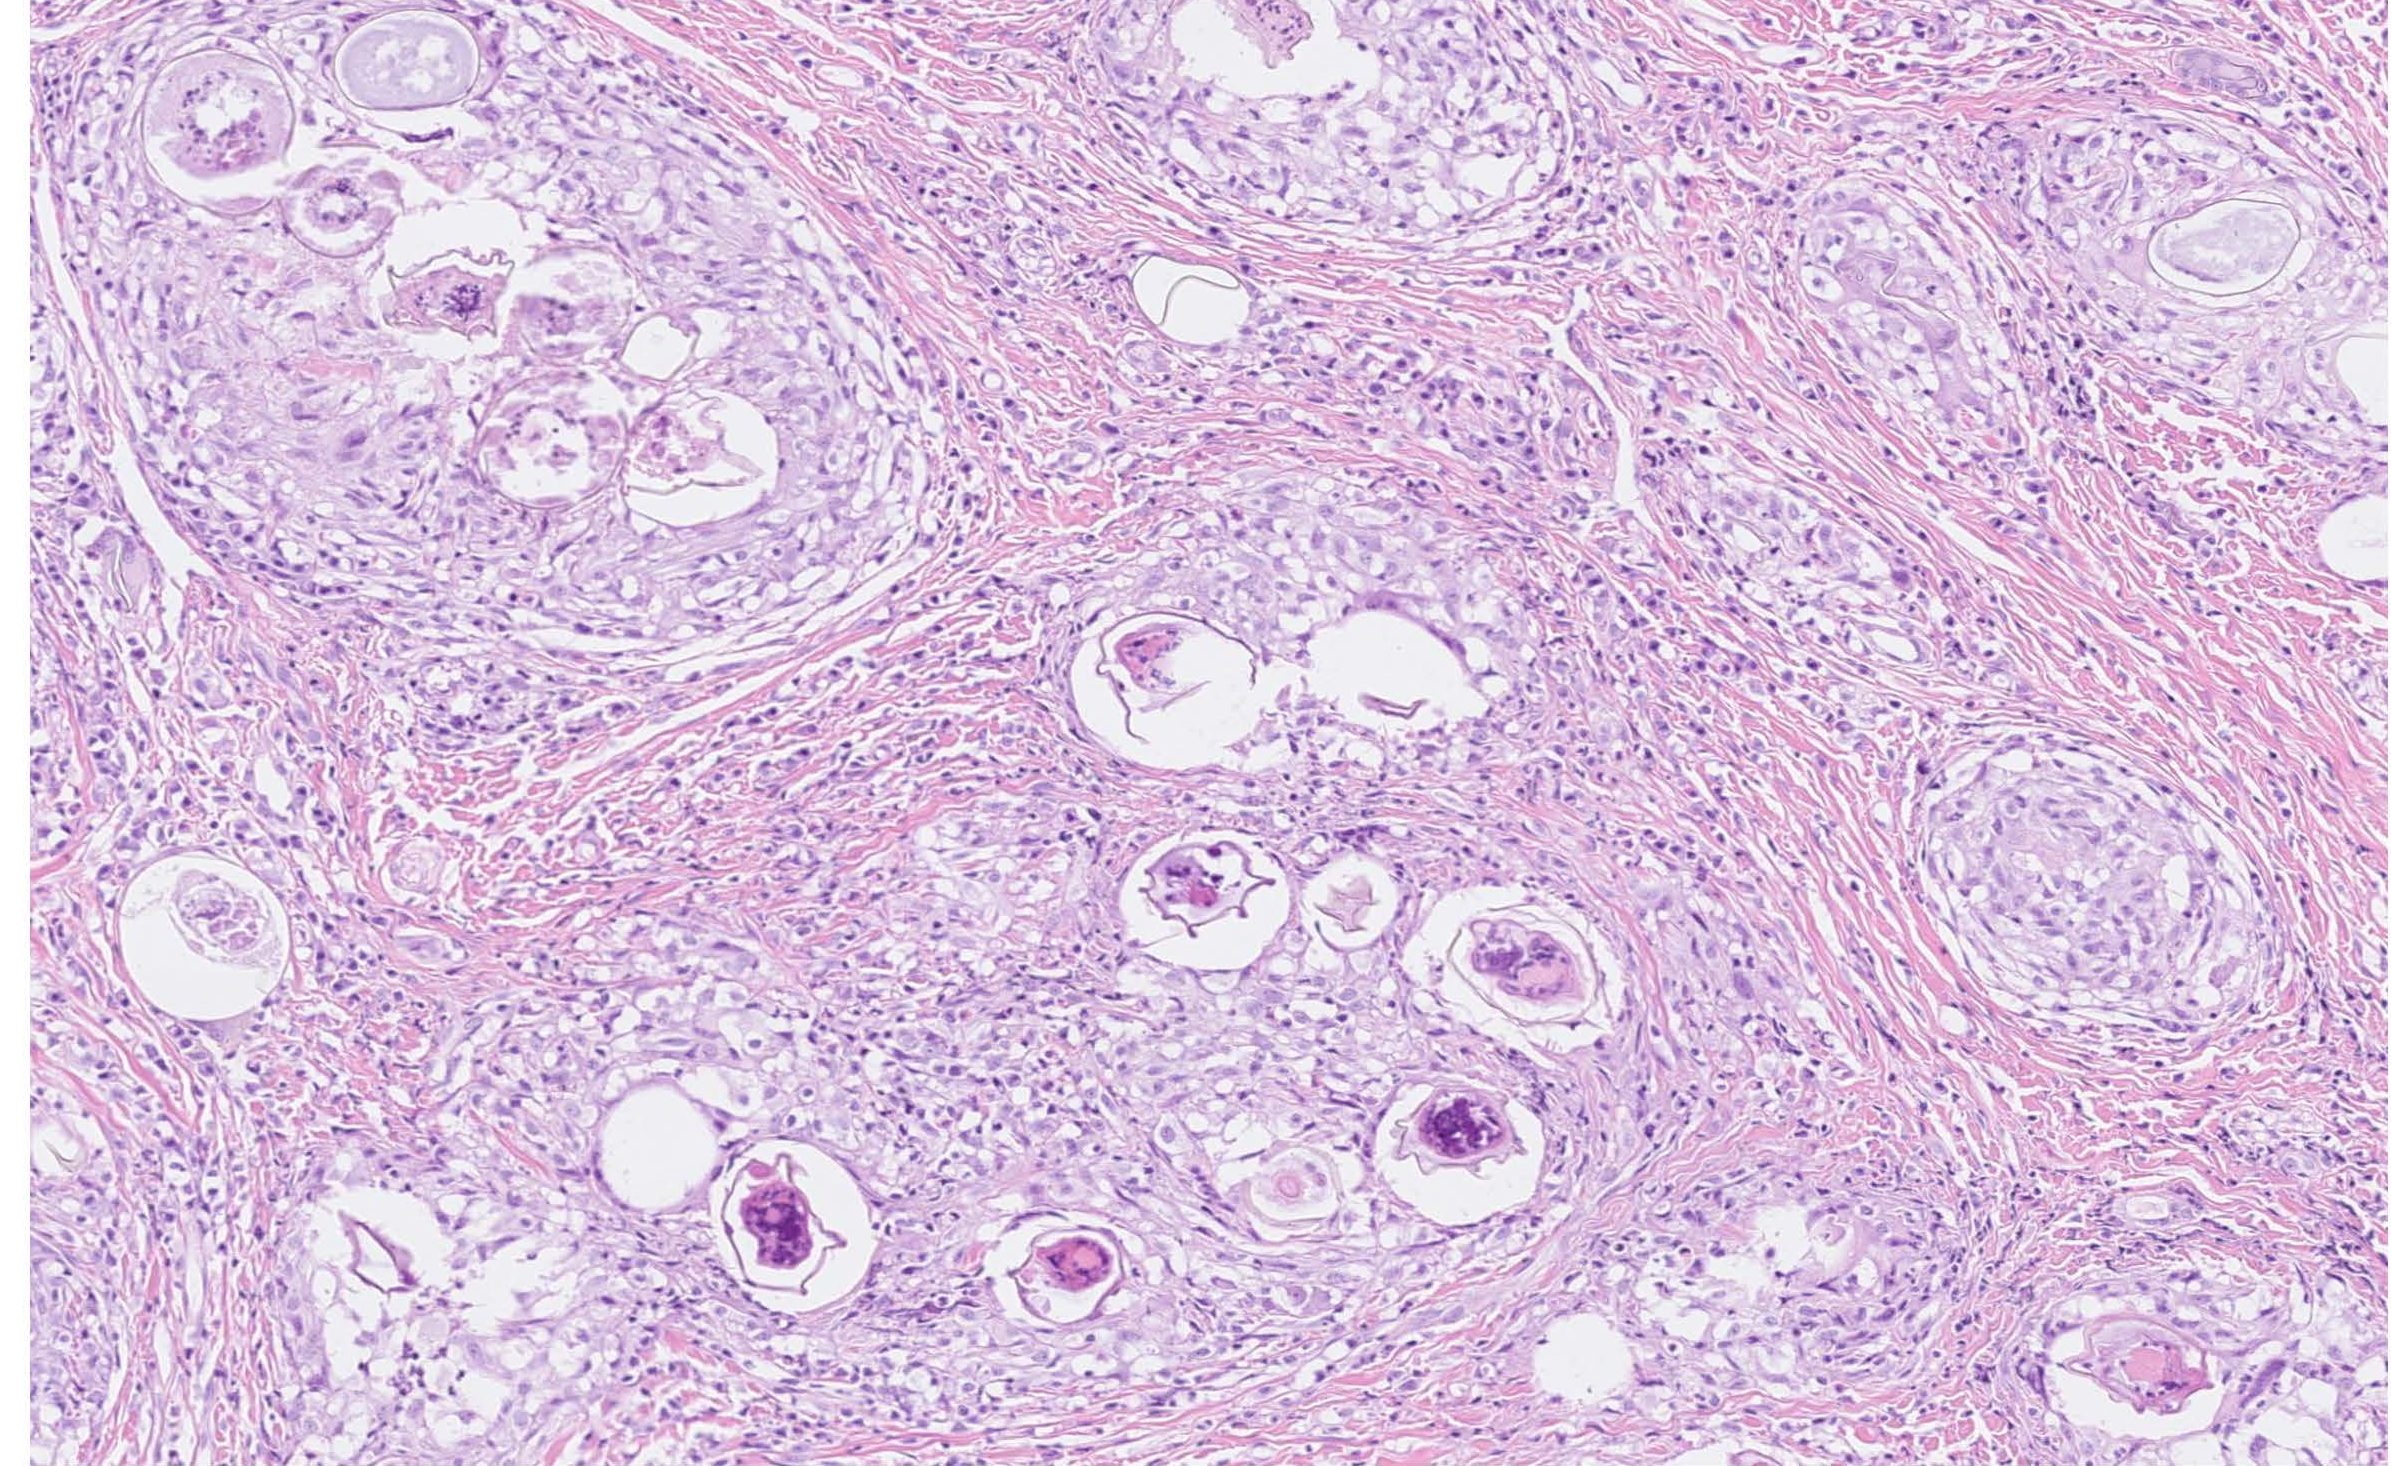 Photomicrograph of numerous trematode ova surrounded by granulomatous inflammation and fibrous connective tissue.